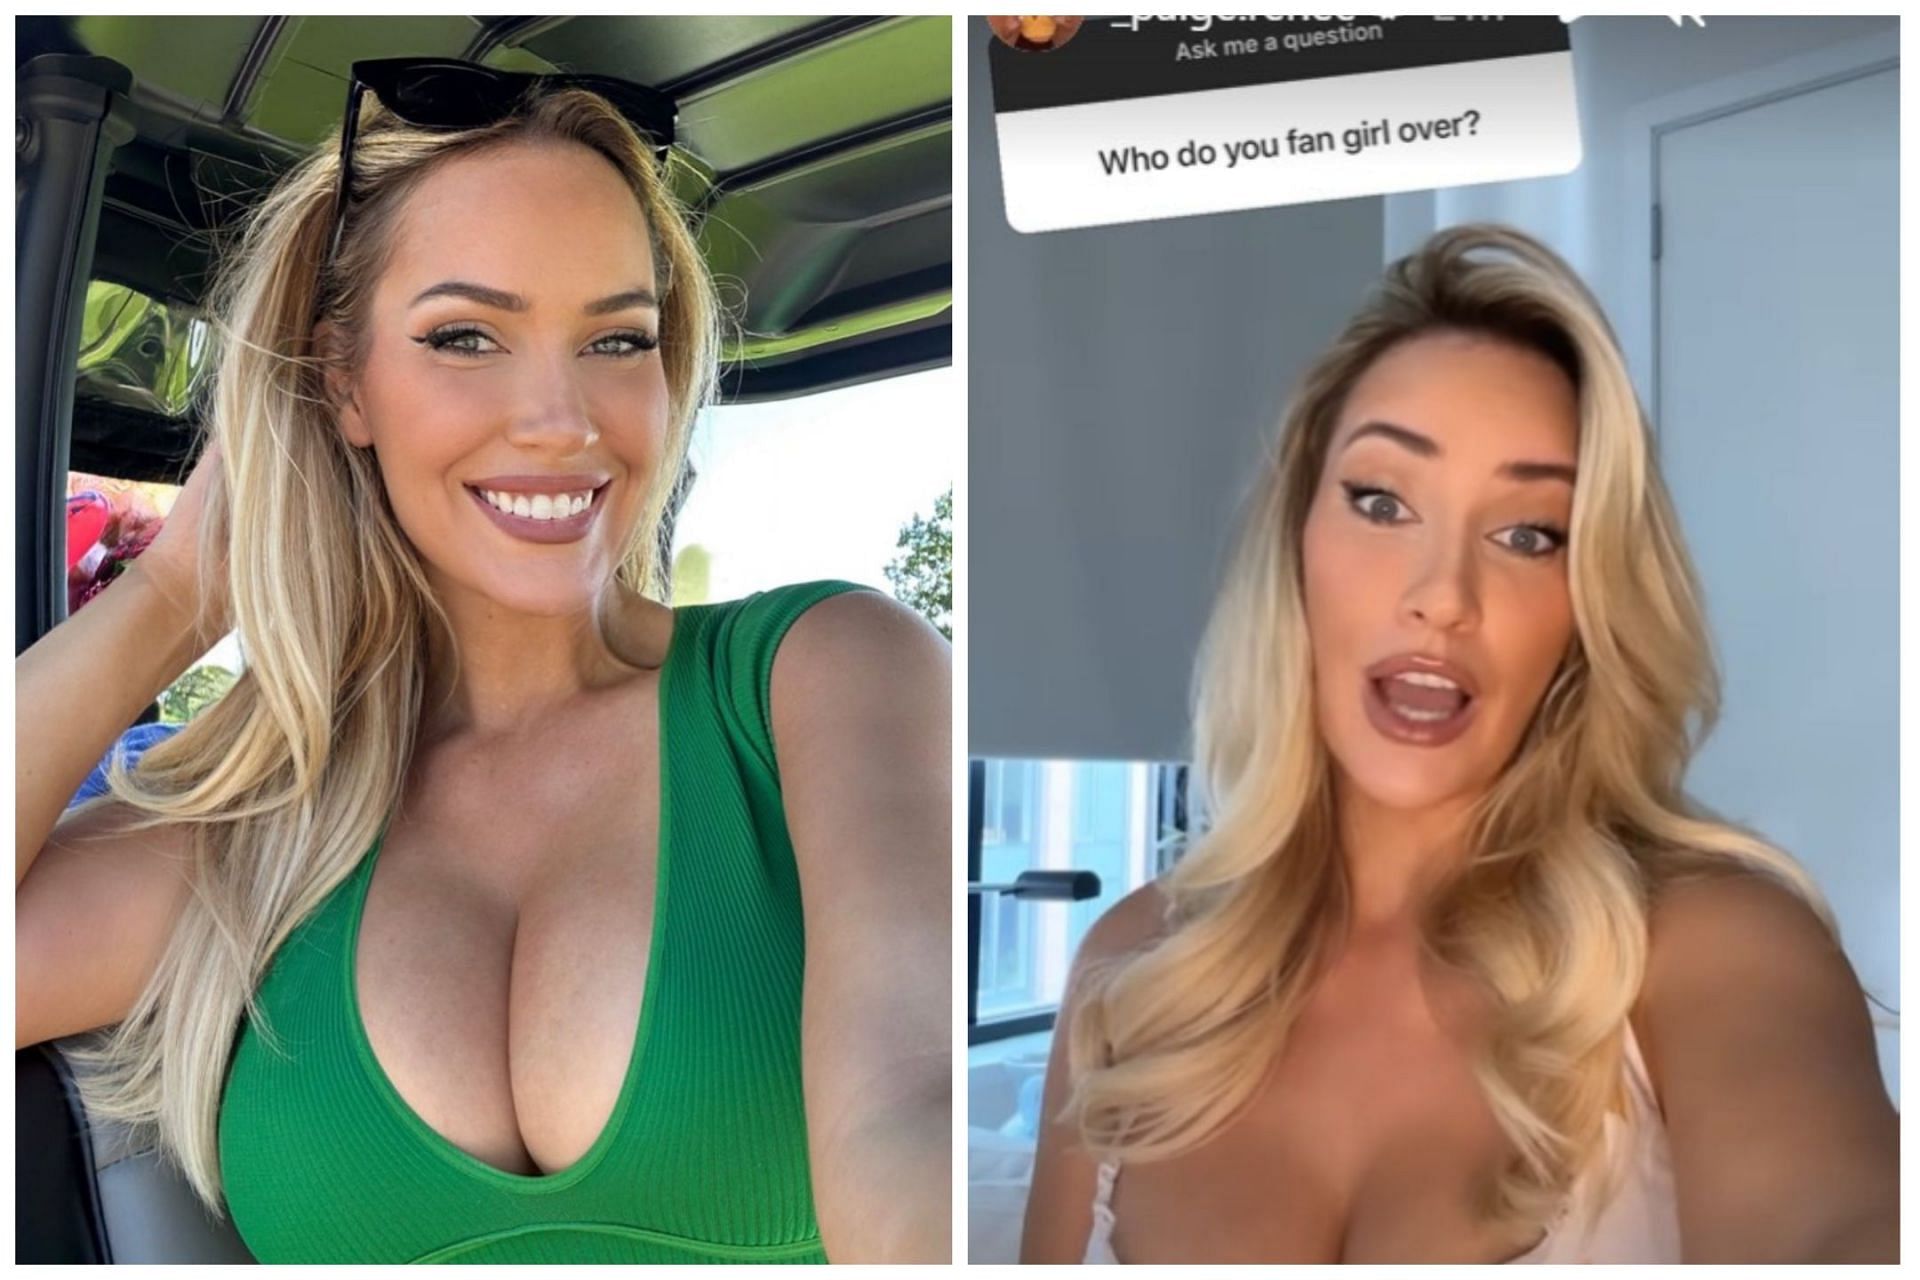 Paige Spiranac revealed her fangirl moment with Tiger Woods (image via www.instagram.com/_paige.renee)